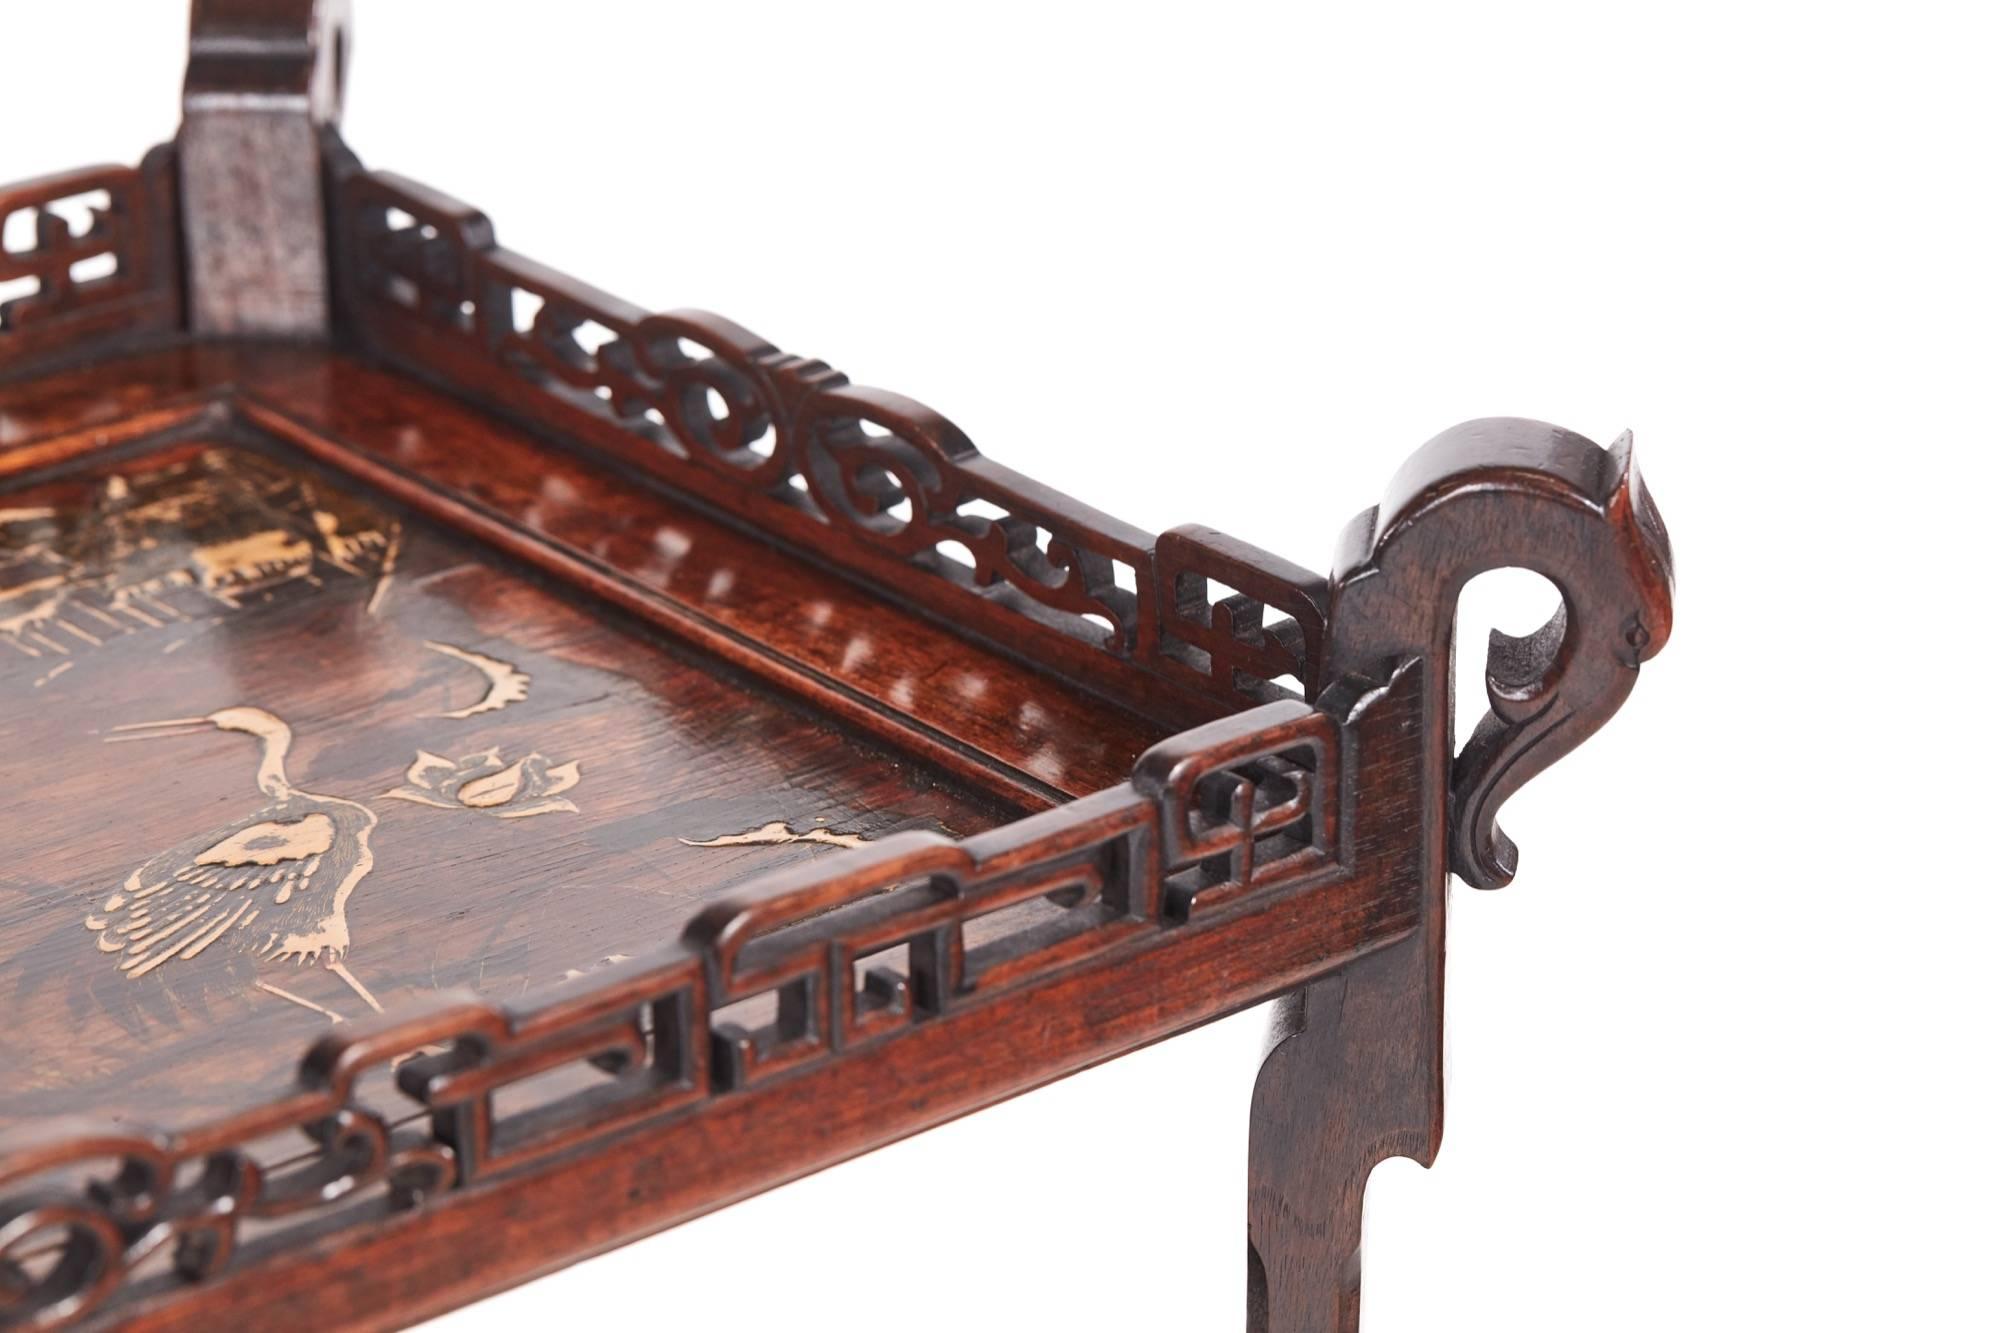 Unusual Meiji period oriental hardwood inlaid table / stand, with a lovely inlaid top and a pierced gallery, three hardwood under-tiers with pierced supports, standing on four shaped legs, original castors
Lovely color and condition
Measure: 27